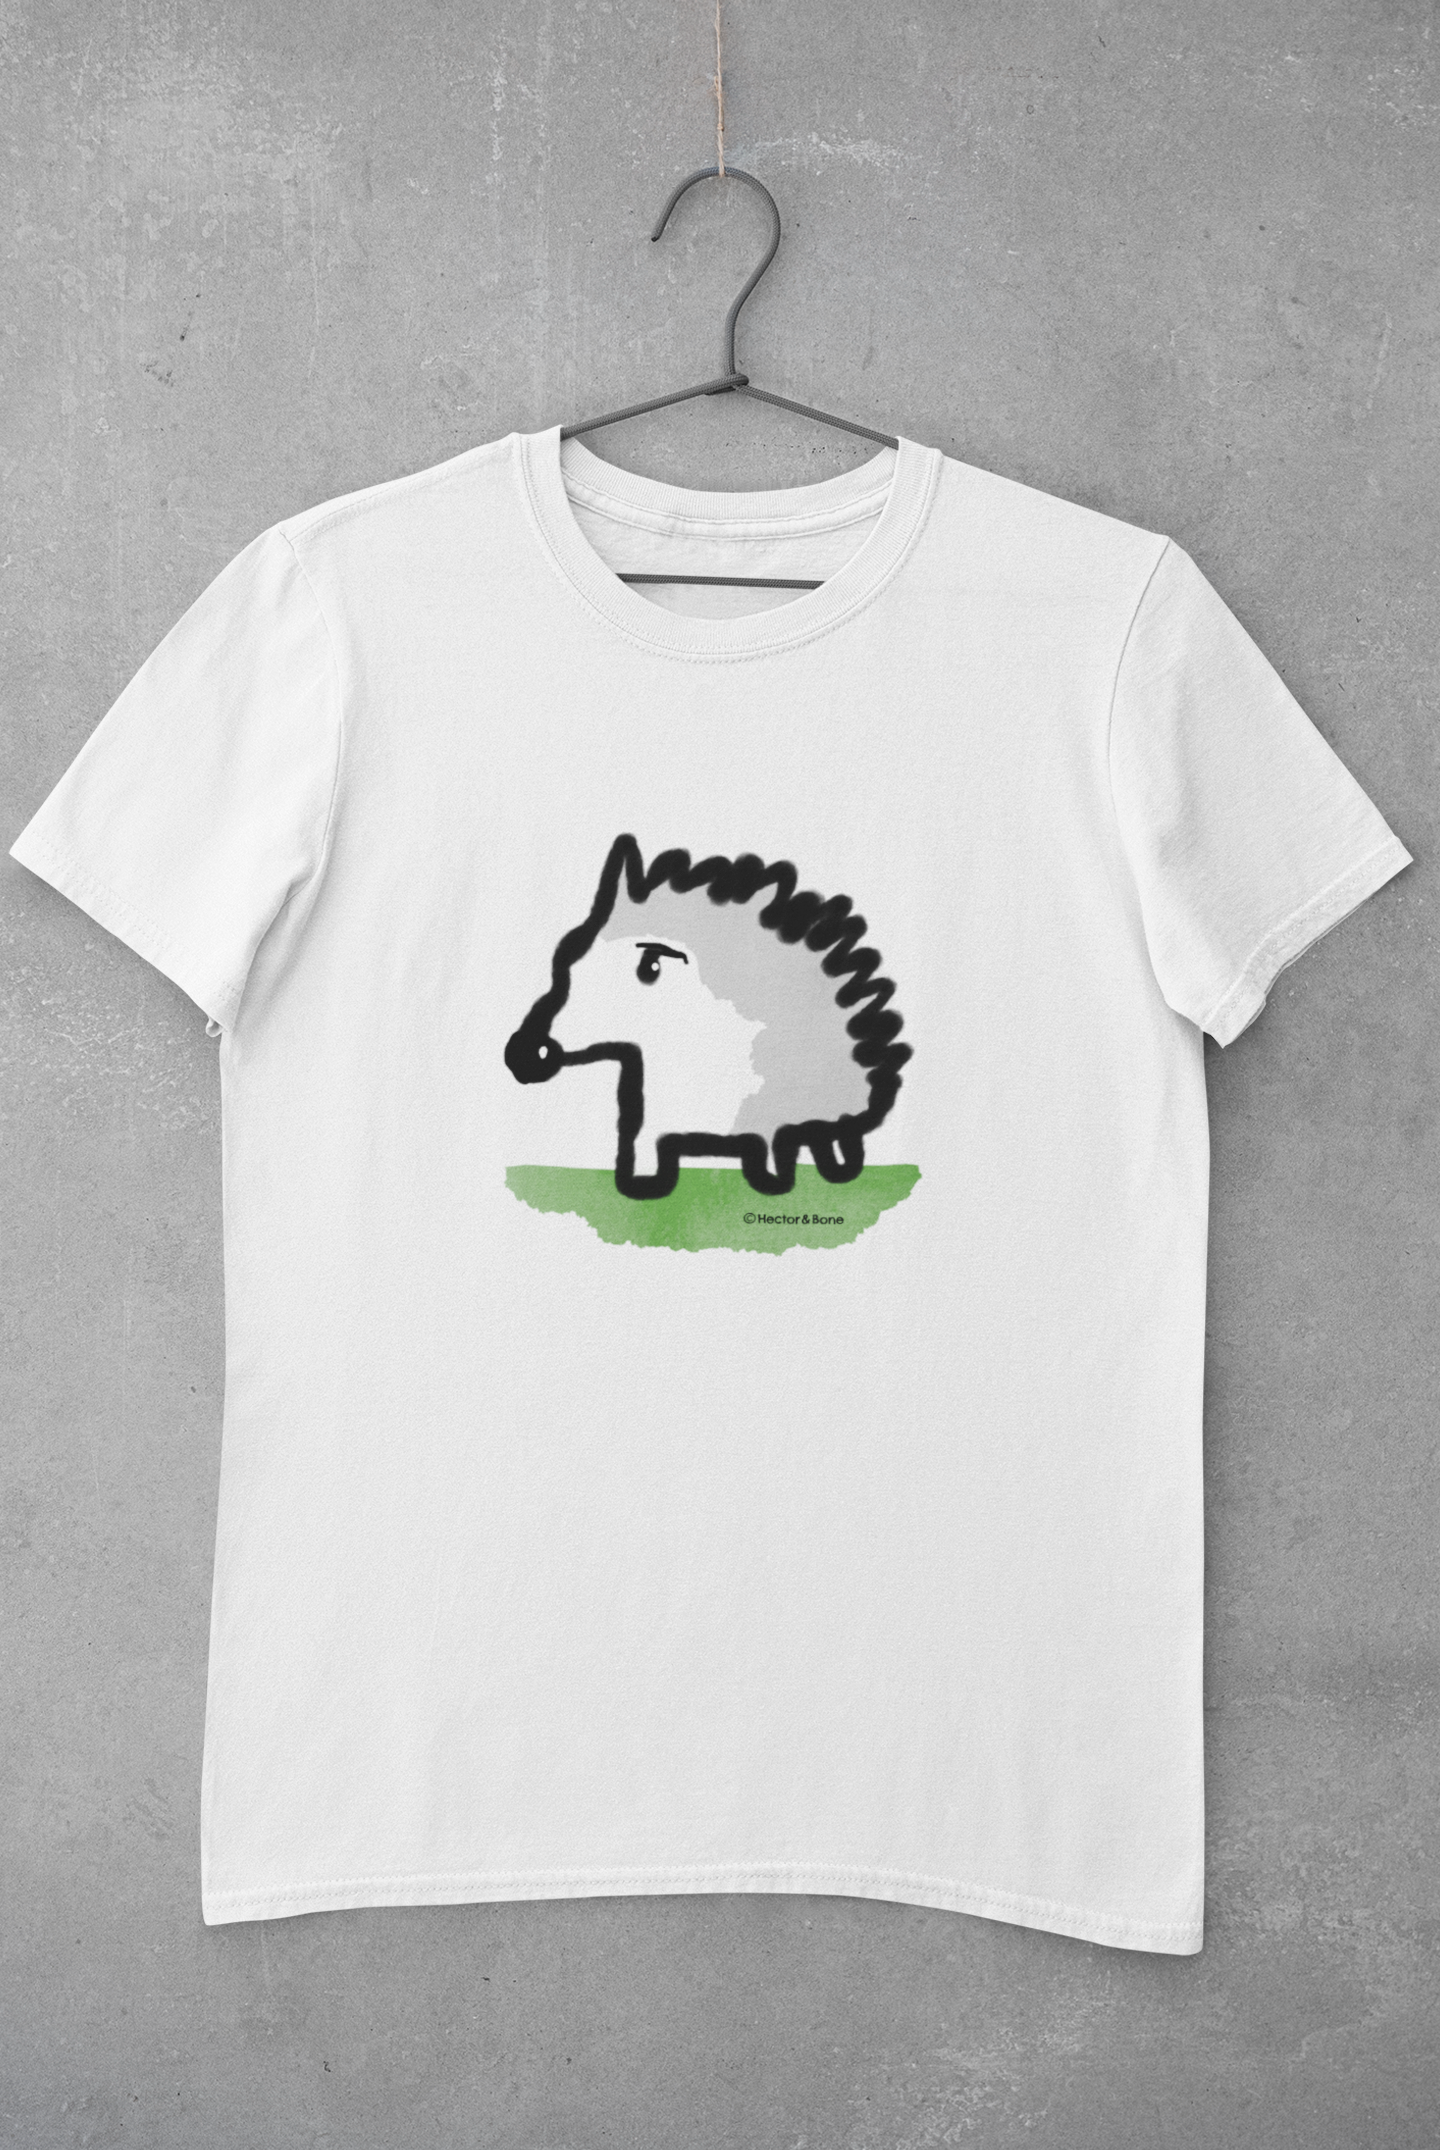 Hedgehog T-shirt - Illustrated Baby Hedgehog t-shirts on white vegan cotton by Hector and Bone